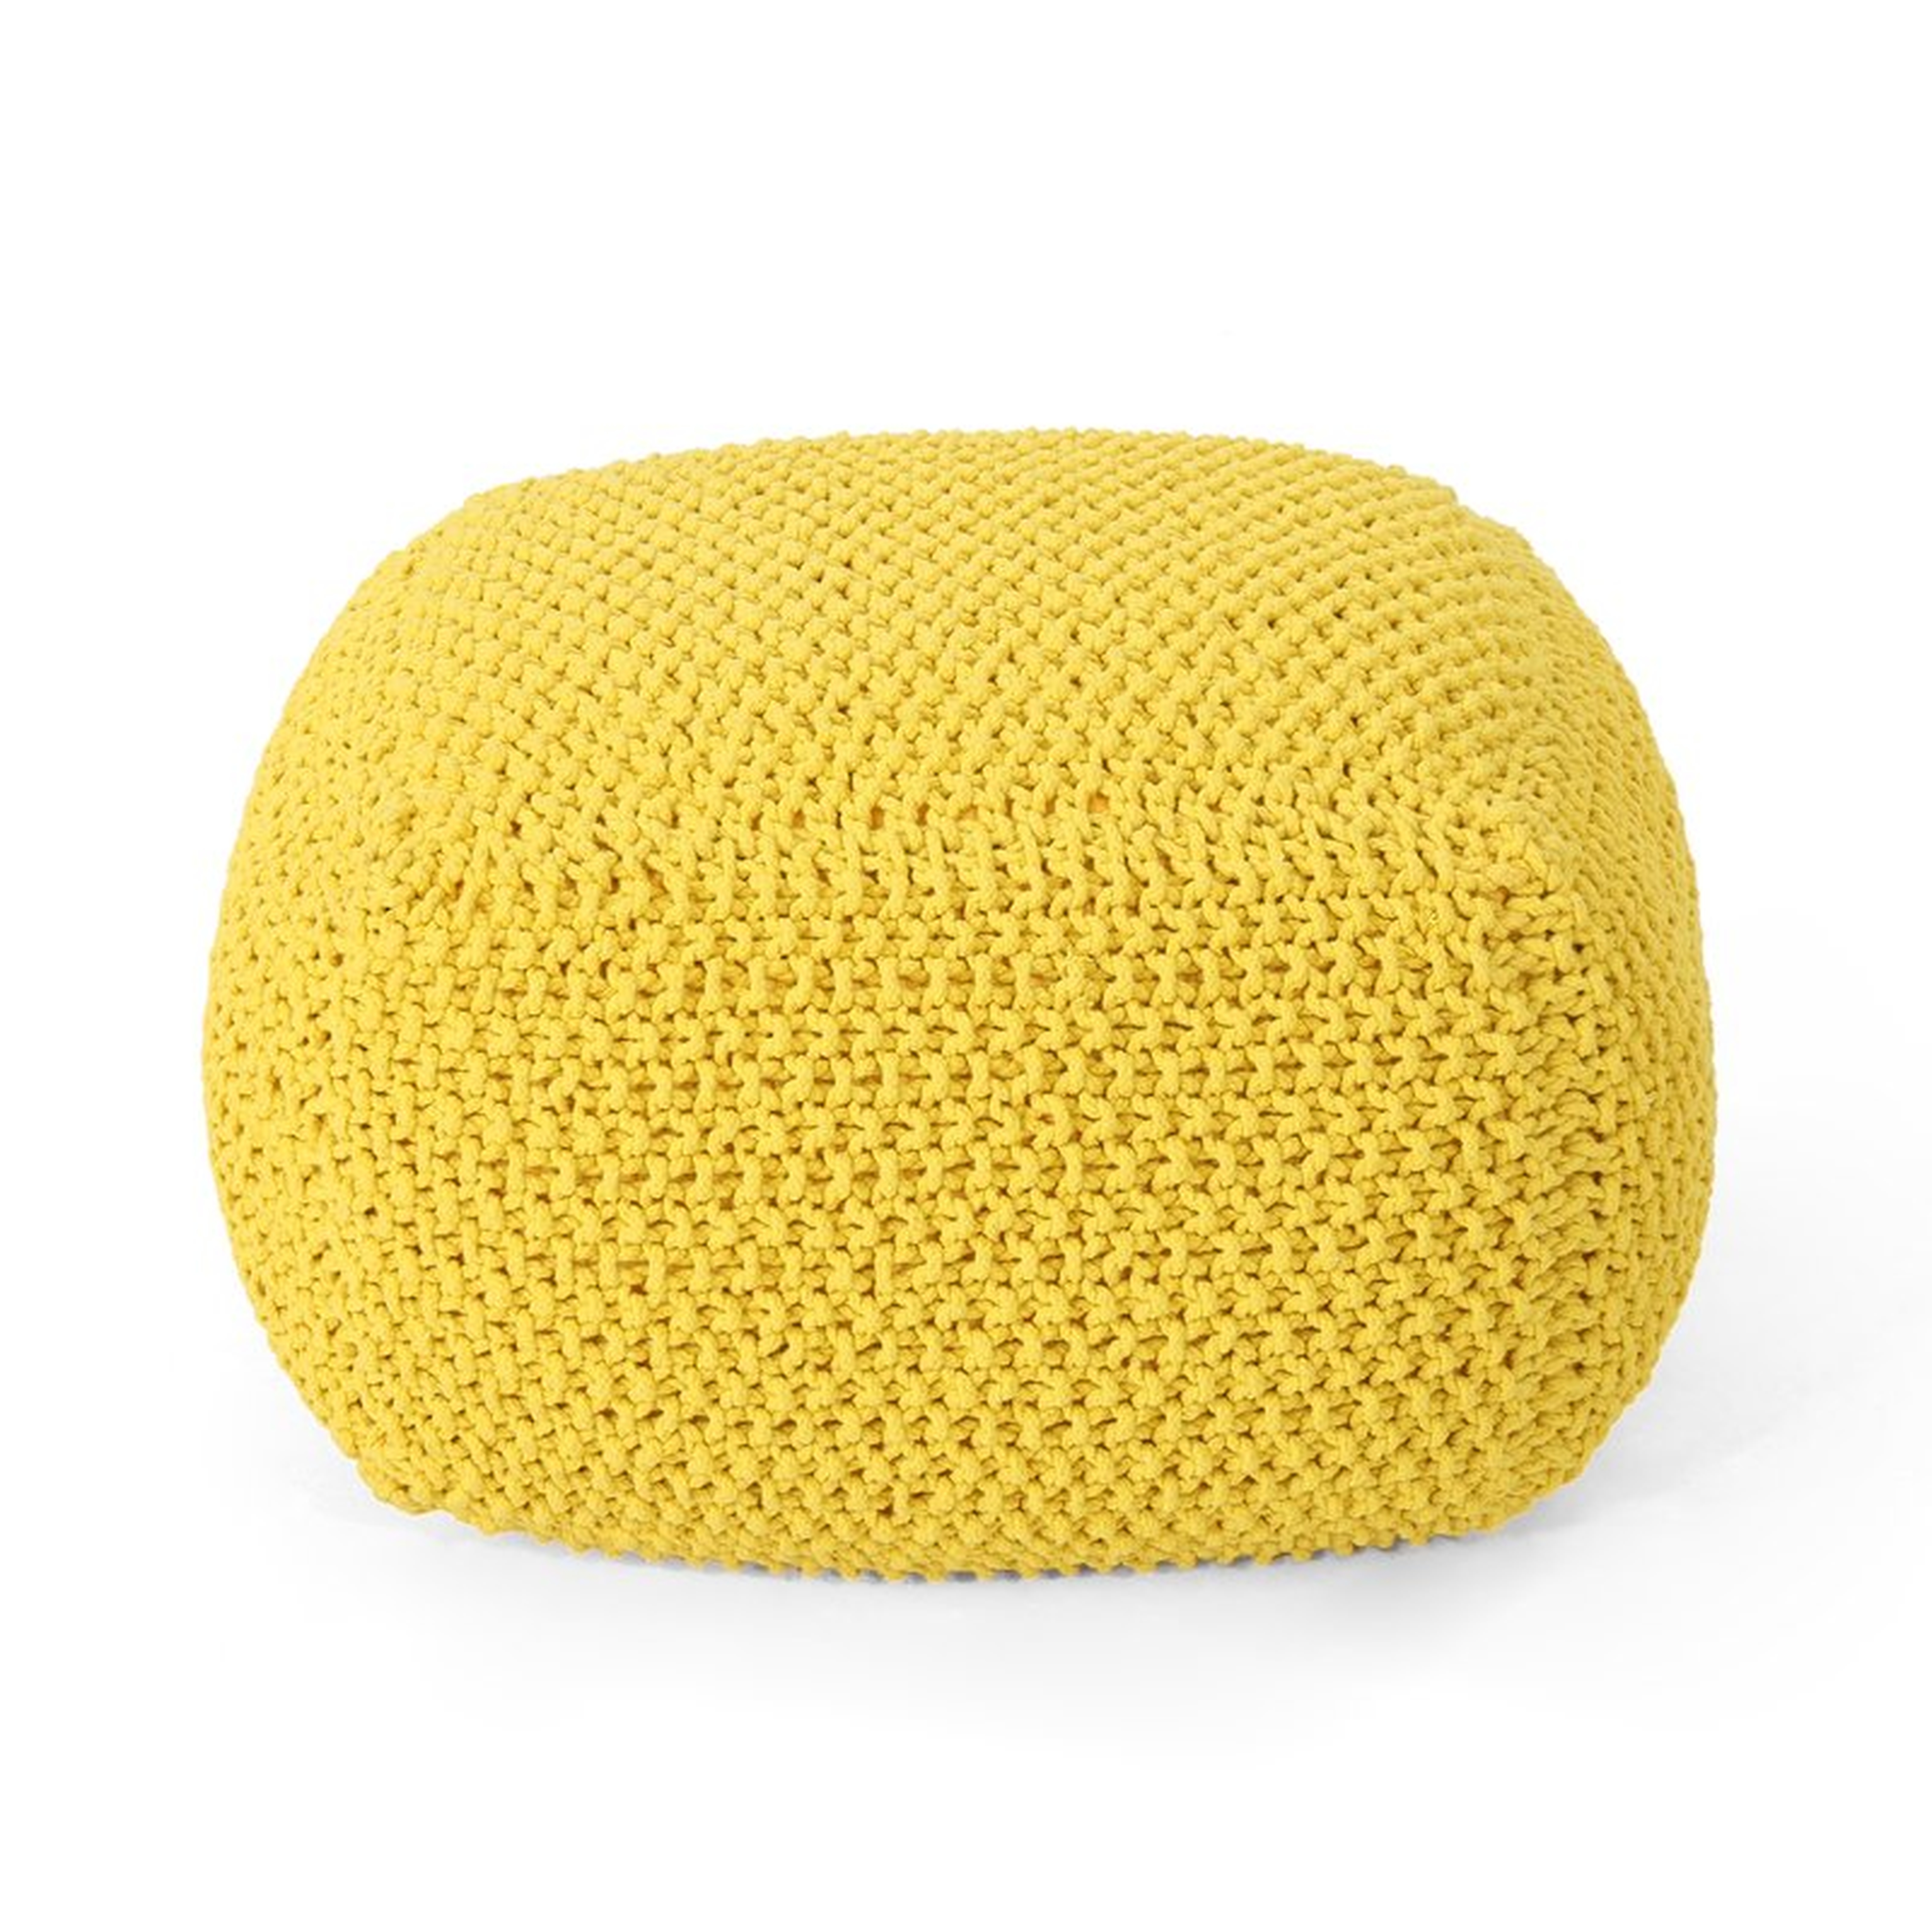 Groner Knitted Pouf - Yellow - Wayfair